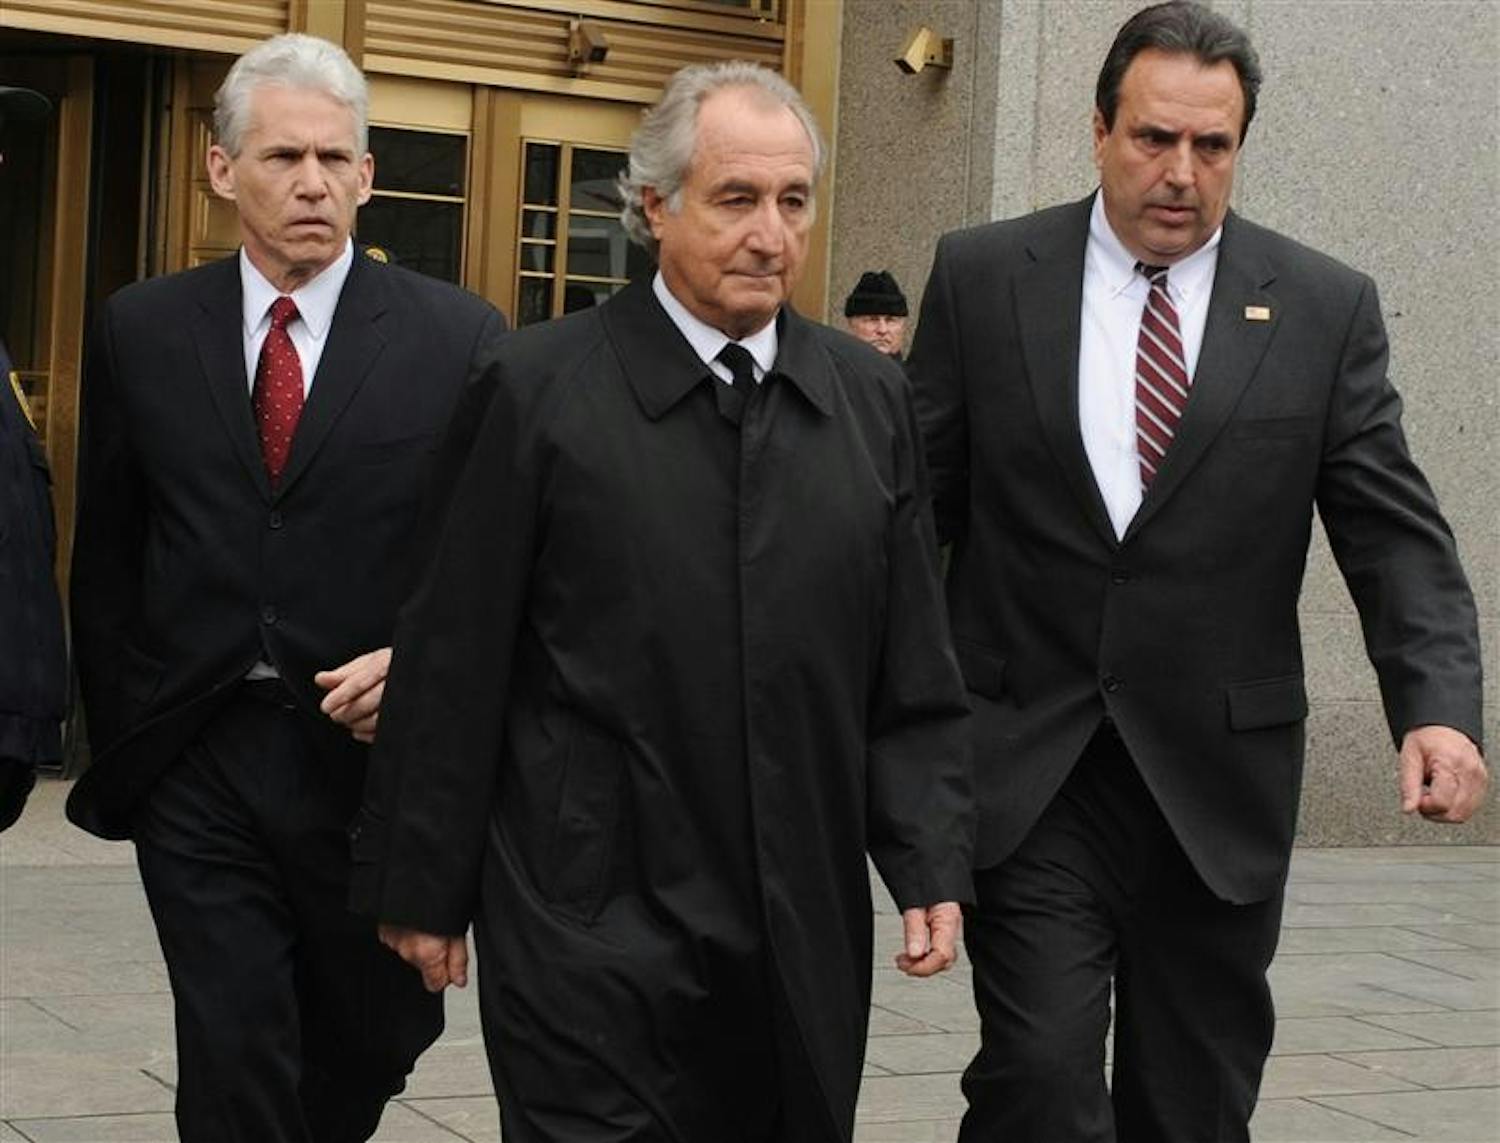 Bernard Madoff exits Manhattan federal court Tuesday in New York. Bernard Madoff will plead guilty Thursday to 11 criminal counts including money laundering, perjury and securities, mail and wire fraud and will do so without a plea deal, knowing it carries a potential prison term of 150 years, lawyers said Tuesday in court. (AP Photo/ Louis Lanzano)